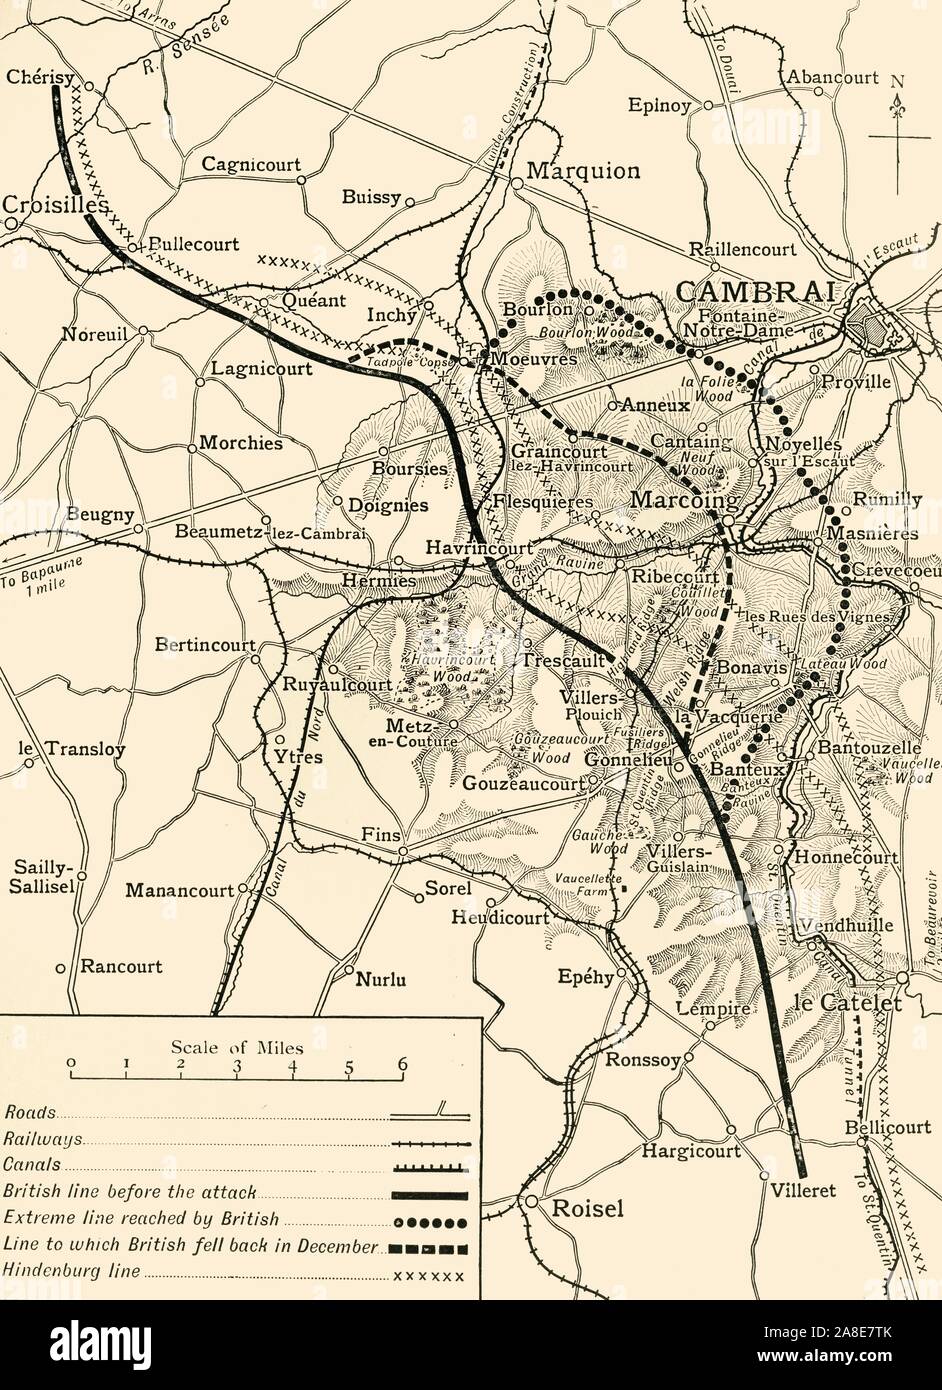 'Map illustrating the First Battles of Cambrai, November-December 1917', (c1920). 'Note - Hill shading is shown only in the area covered by the sphere of operations described'. The Battle of Cambrai during the First World War was fought around the town of Cambrai in northern France. Also indicated are: 'British line before attack', 'Extreme line reached by British', 'Line to which British fell back in December', and the 'Hindenburg line'. From &quot;The Great World War: A History&quot;, Volume VII, edited by Frank A Mumby. [The Gresham Publishing Company Ltd, London, c1920] Stock Photo